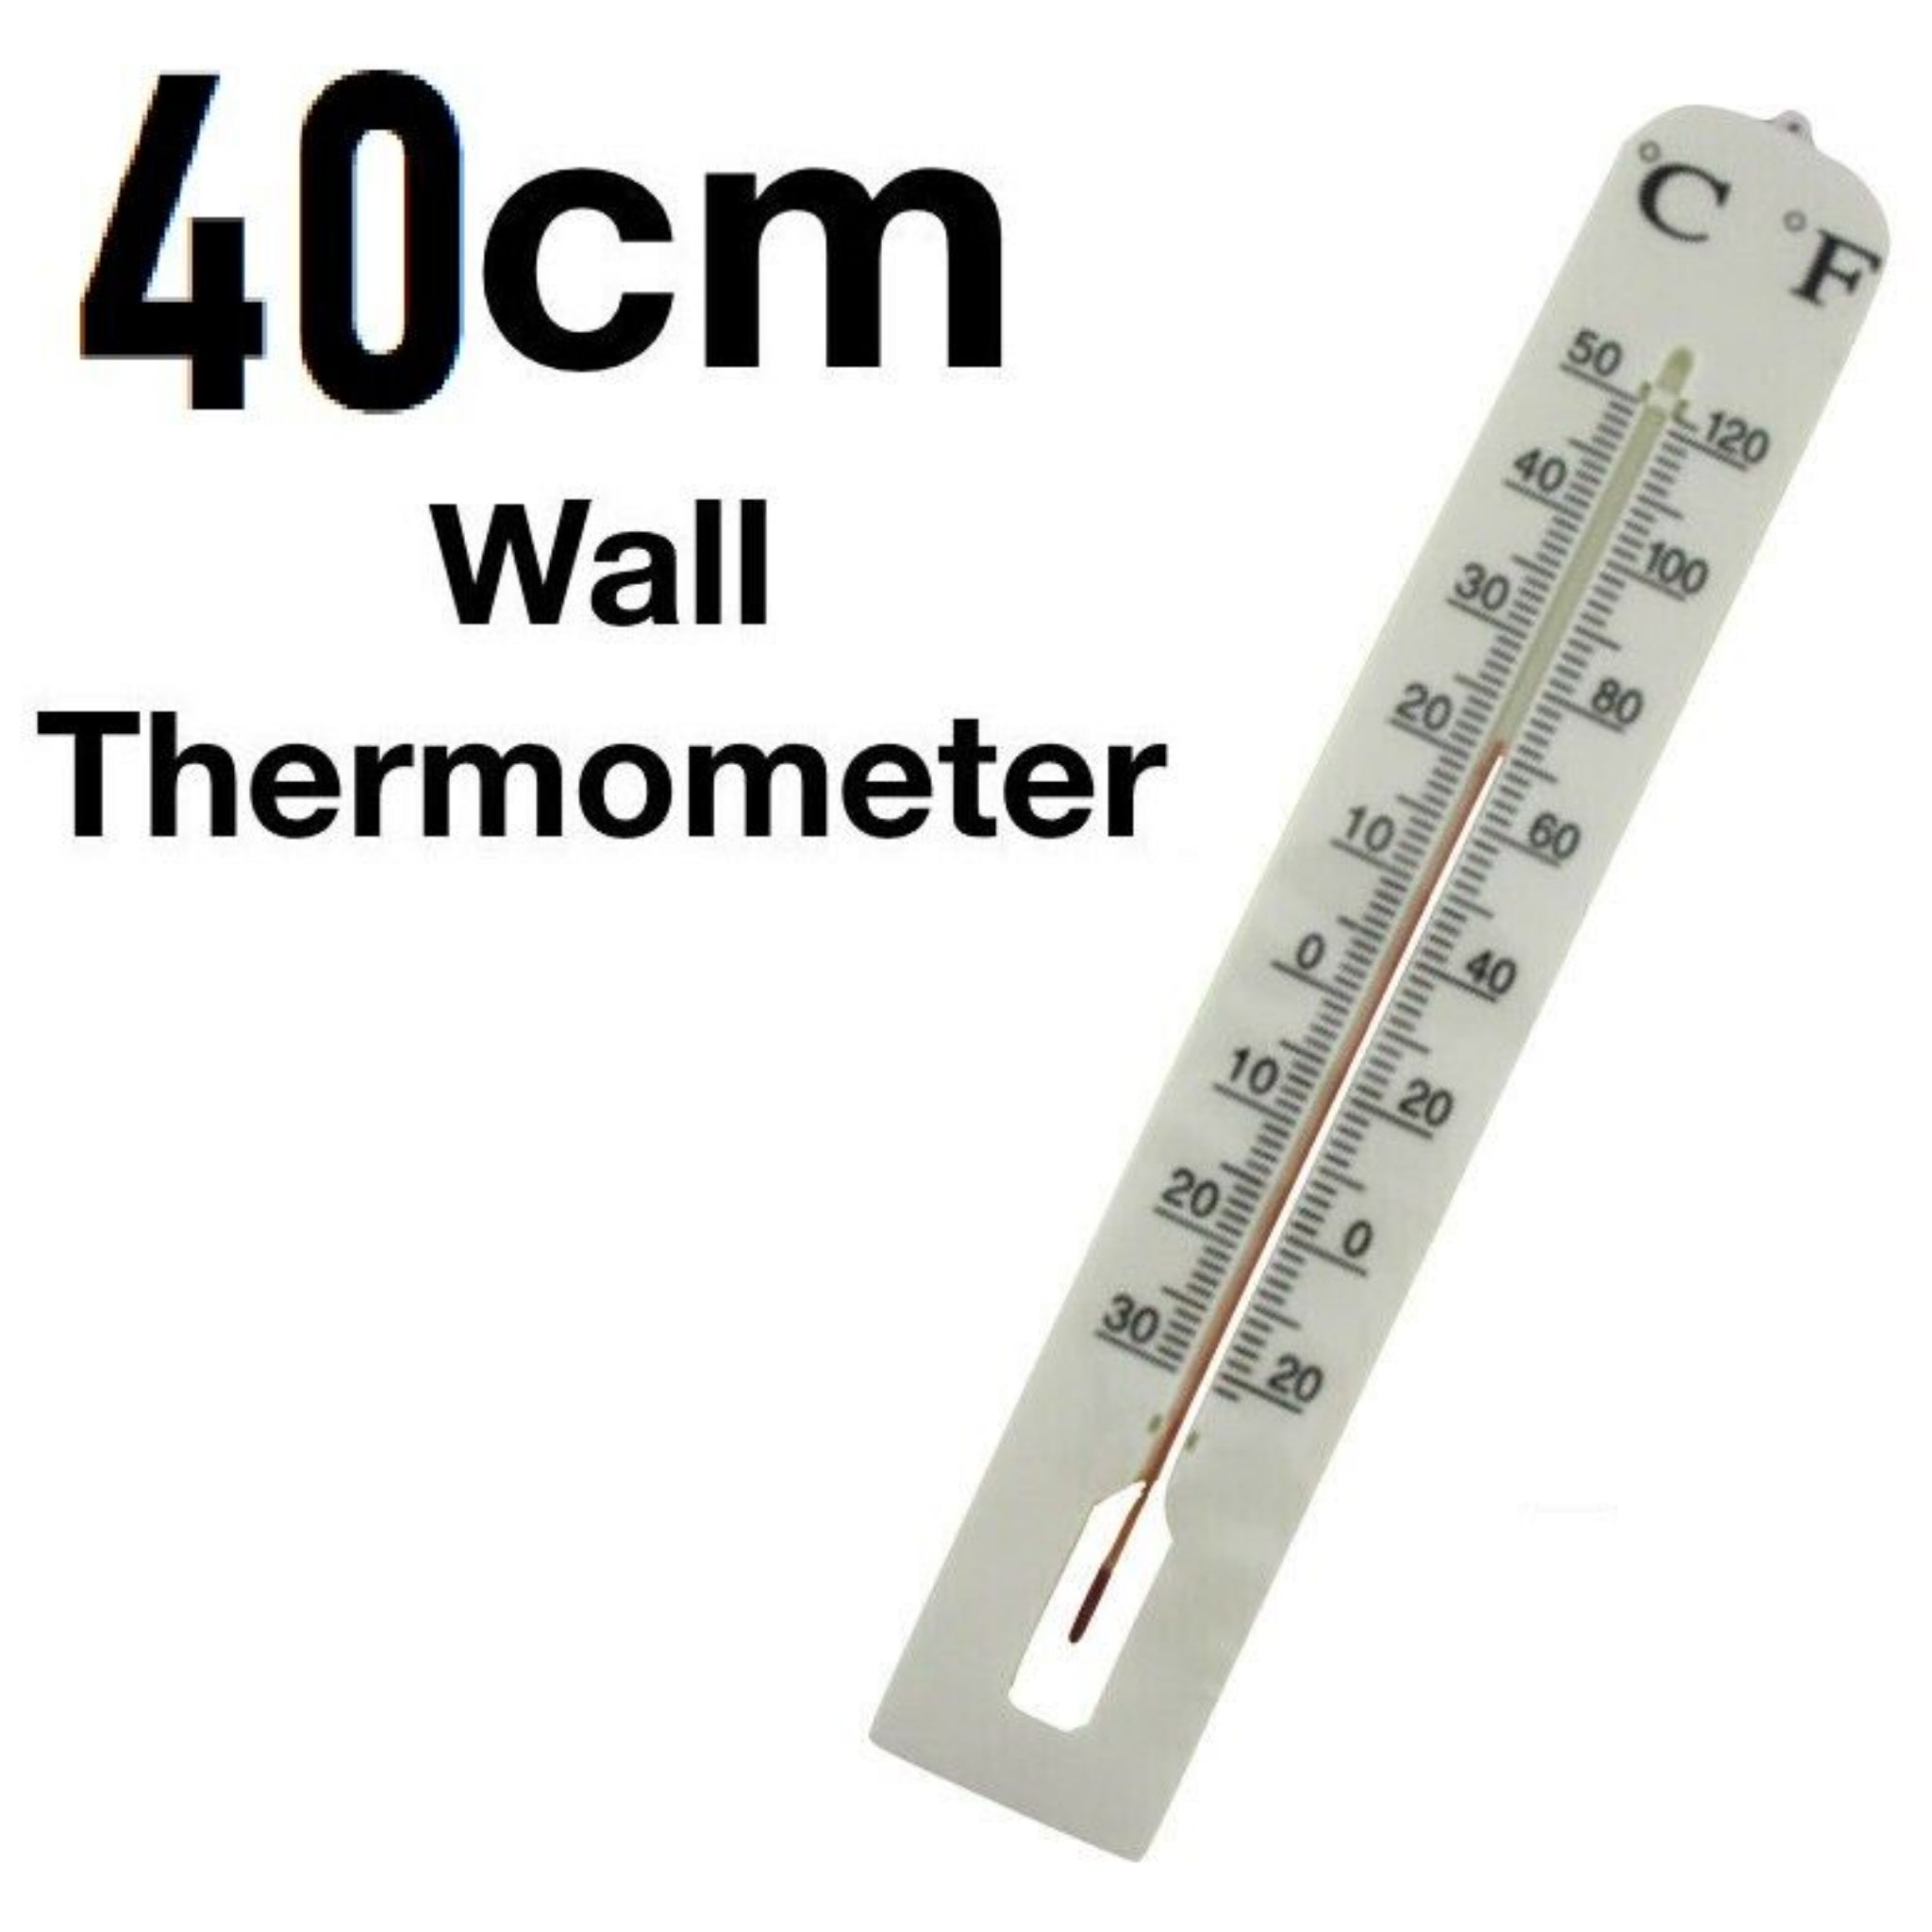 Beclen Harp Indoor/Outdoor Thermometer Wall Large Jumbo Giant 40x6 cm Celsius and Fahrenheit